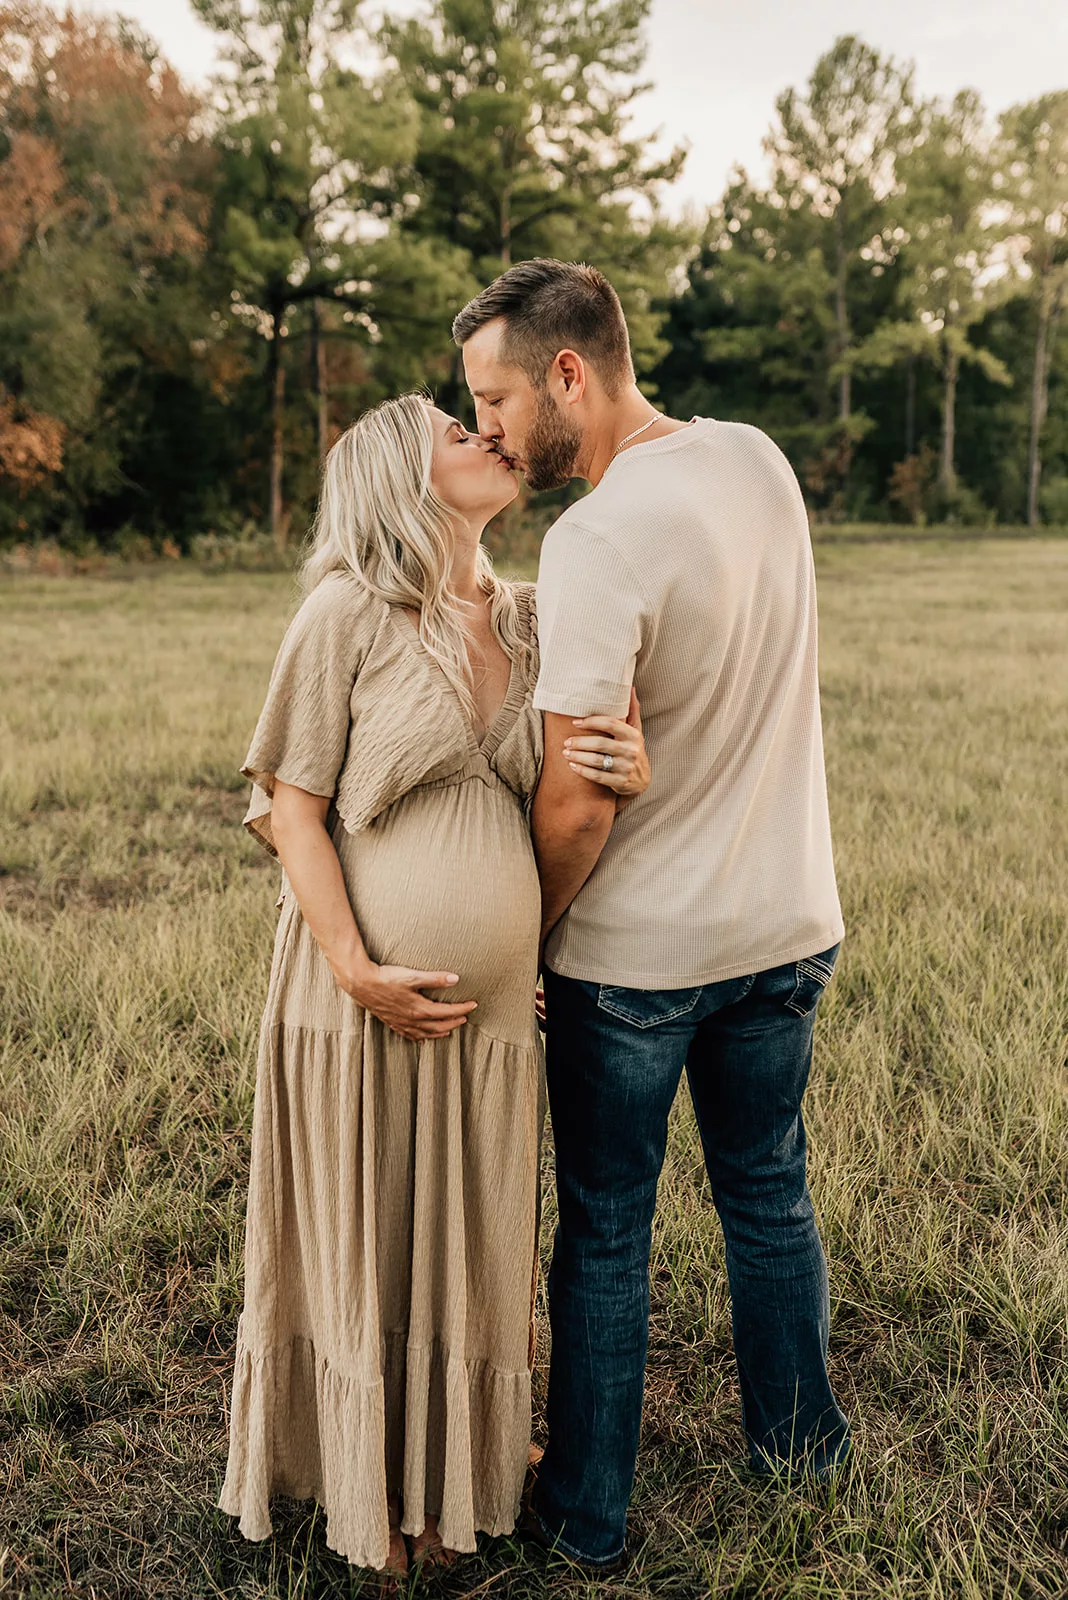 A mom to be holds onto the arm of her husband while they kiss in a field at sunset after meeting with a Houston Postpartum Doula